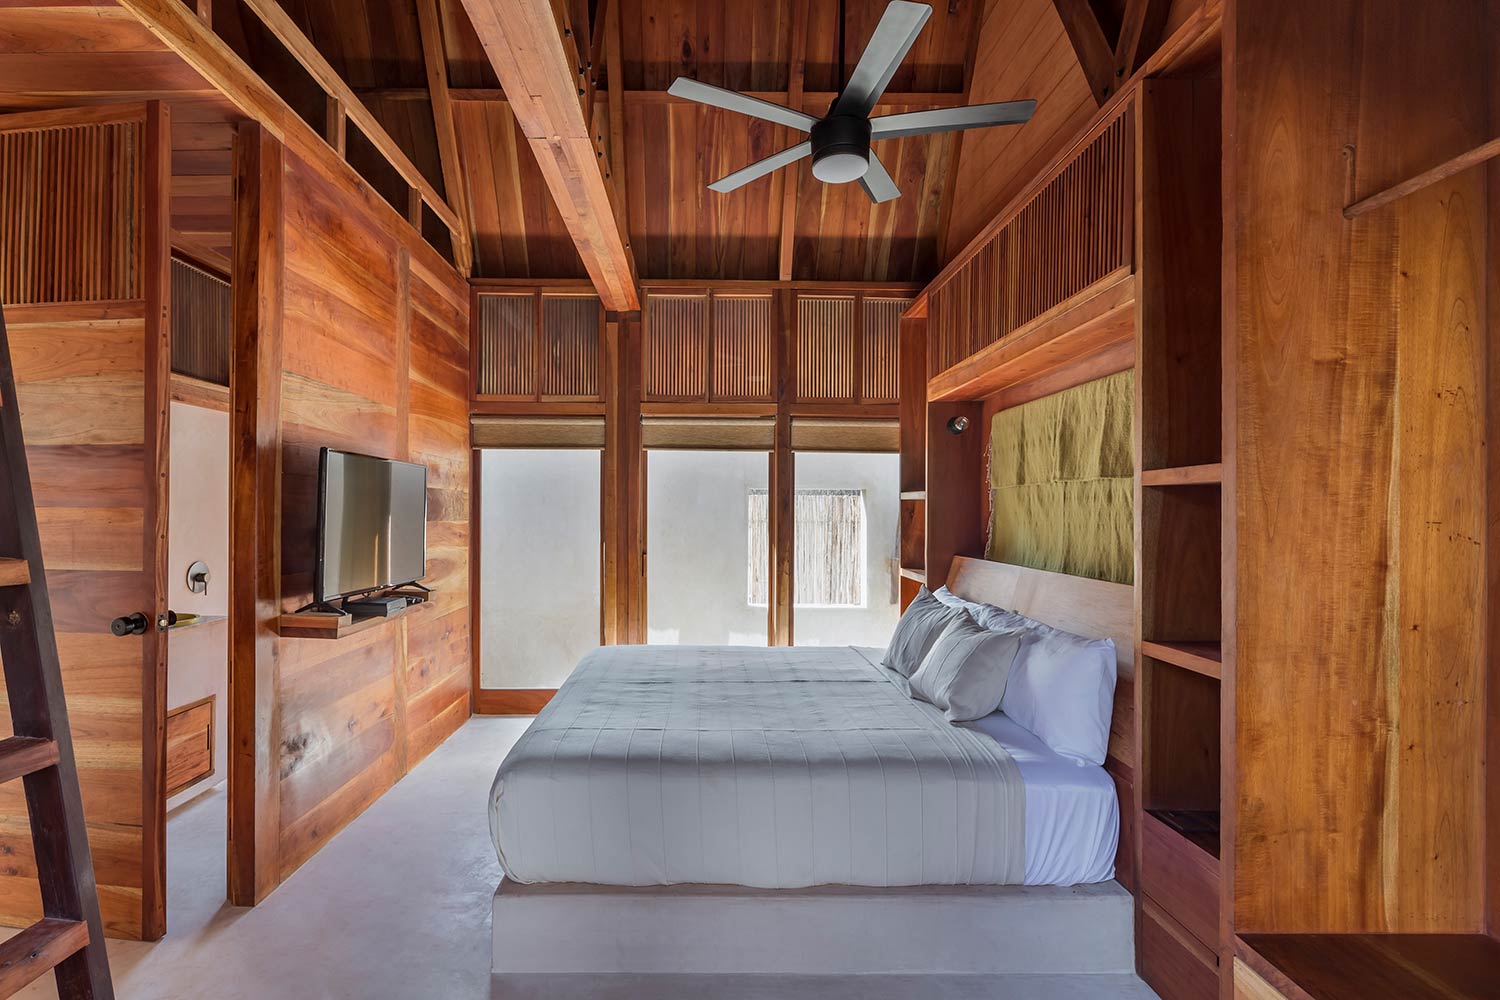 A look inside a wood-covered suite